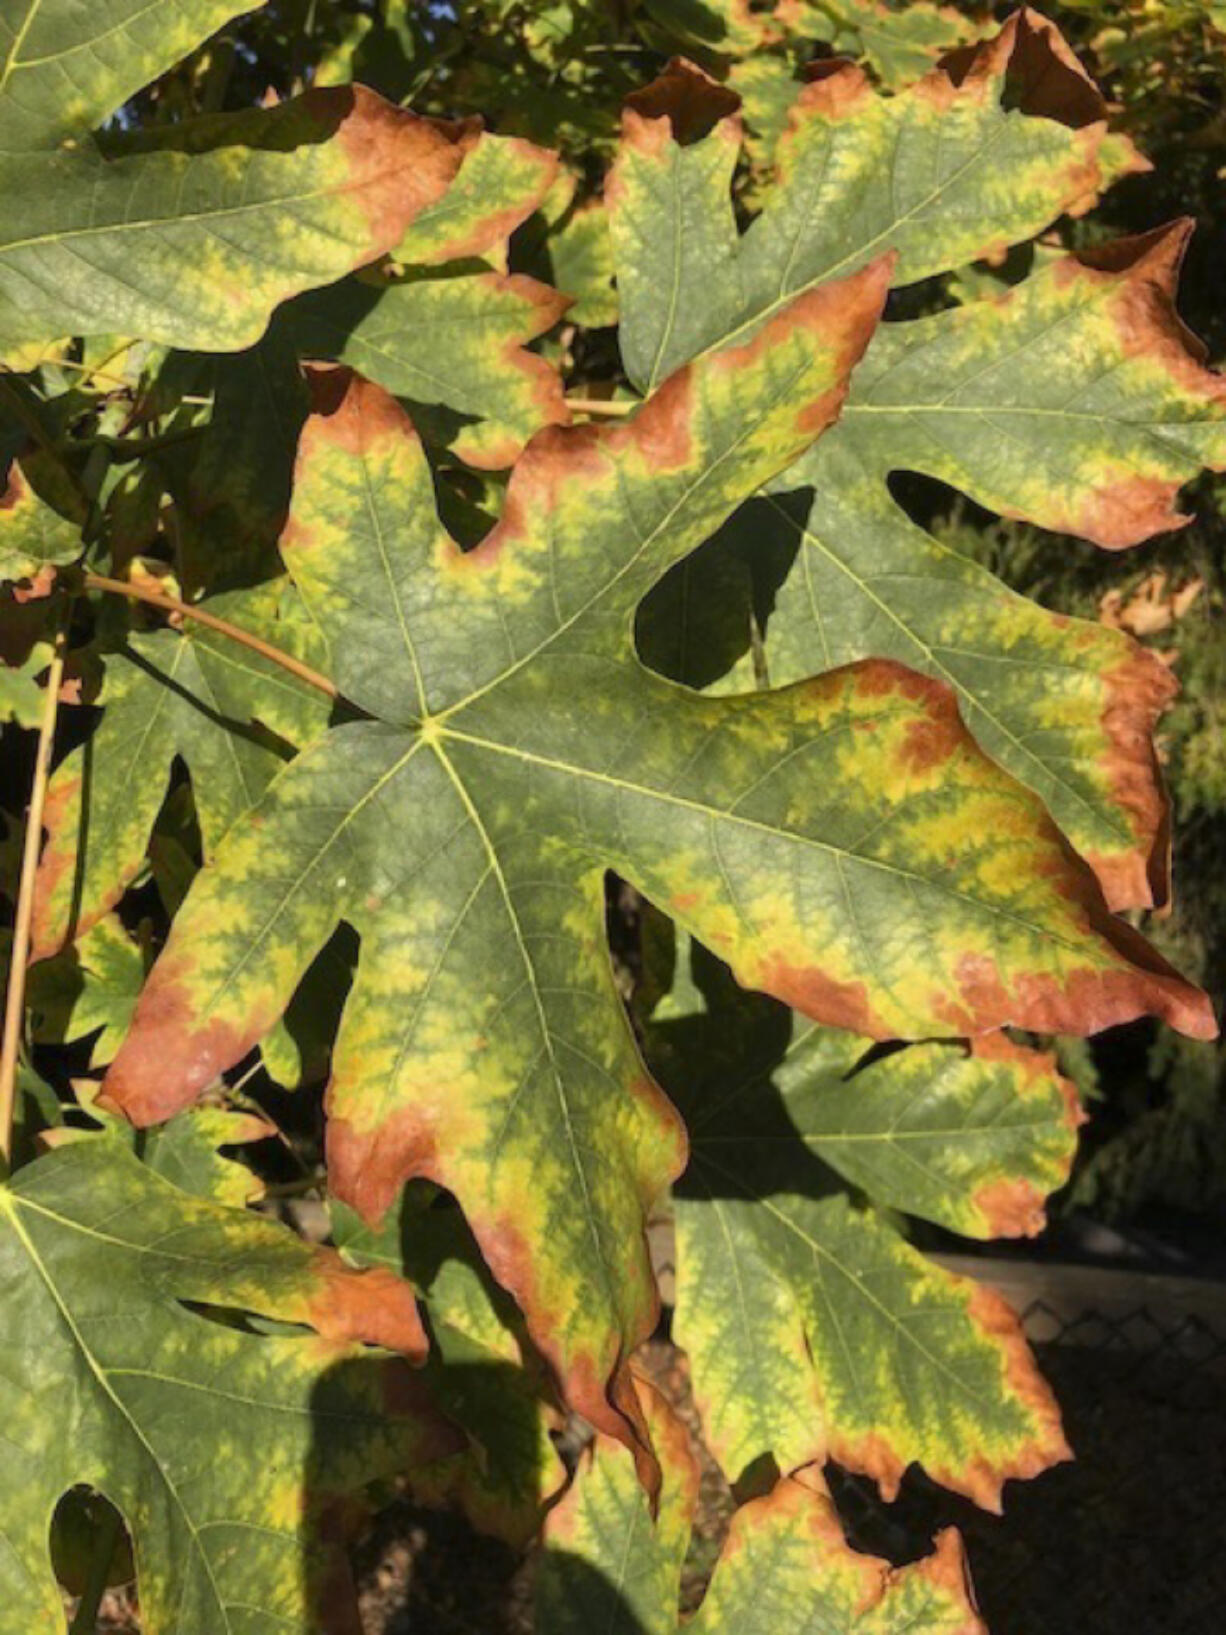 The leaves of this bigleaf maple at Point Defiance Park in Tacoma on Sept. 5 show leaf scorch, a sign of the die-back affecting the species throughout the Pacific Northwest.